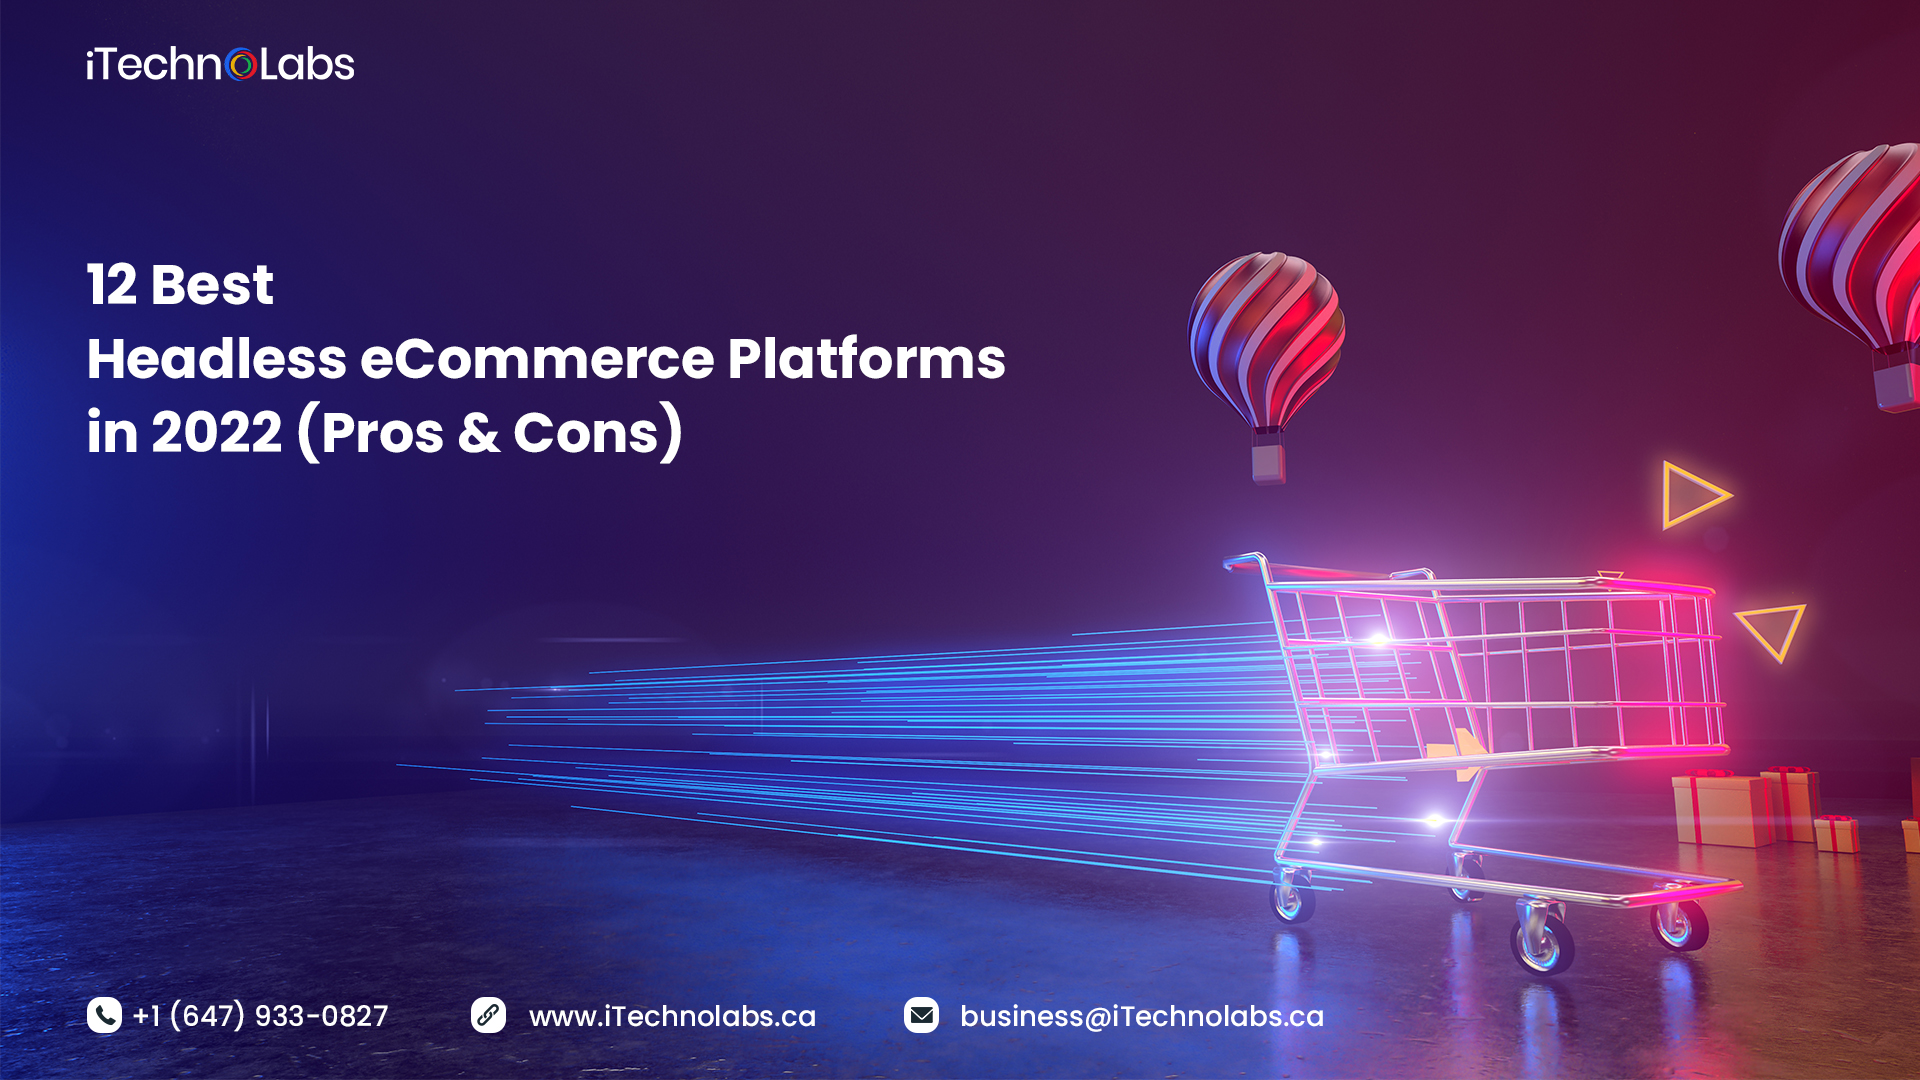 12 best headless ecommerce platforms in 2022 pros & cons itechnolabs